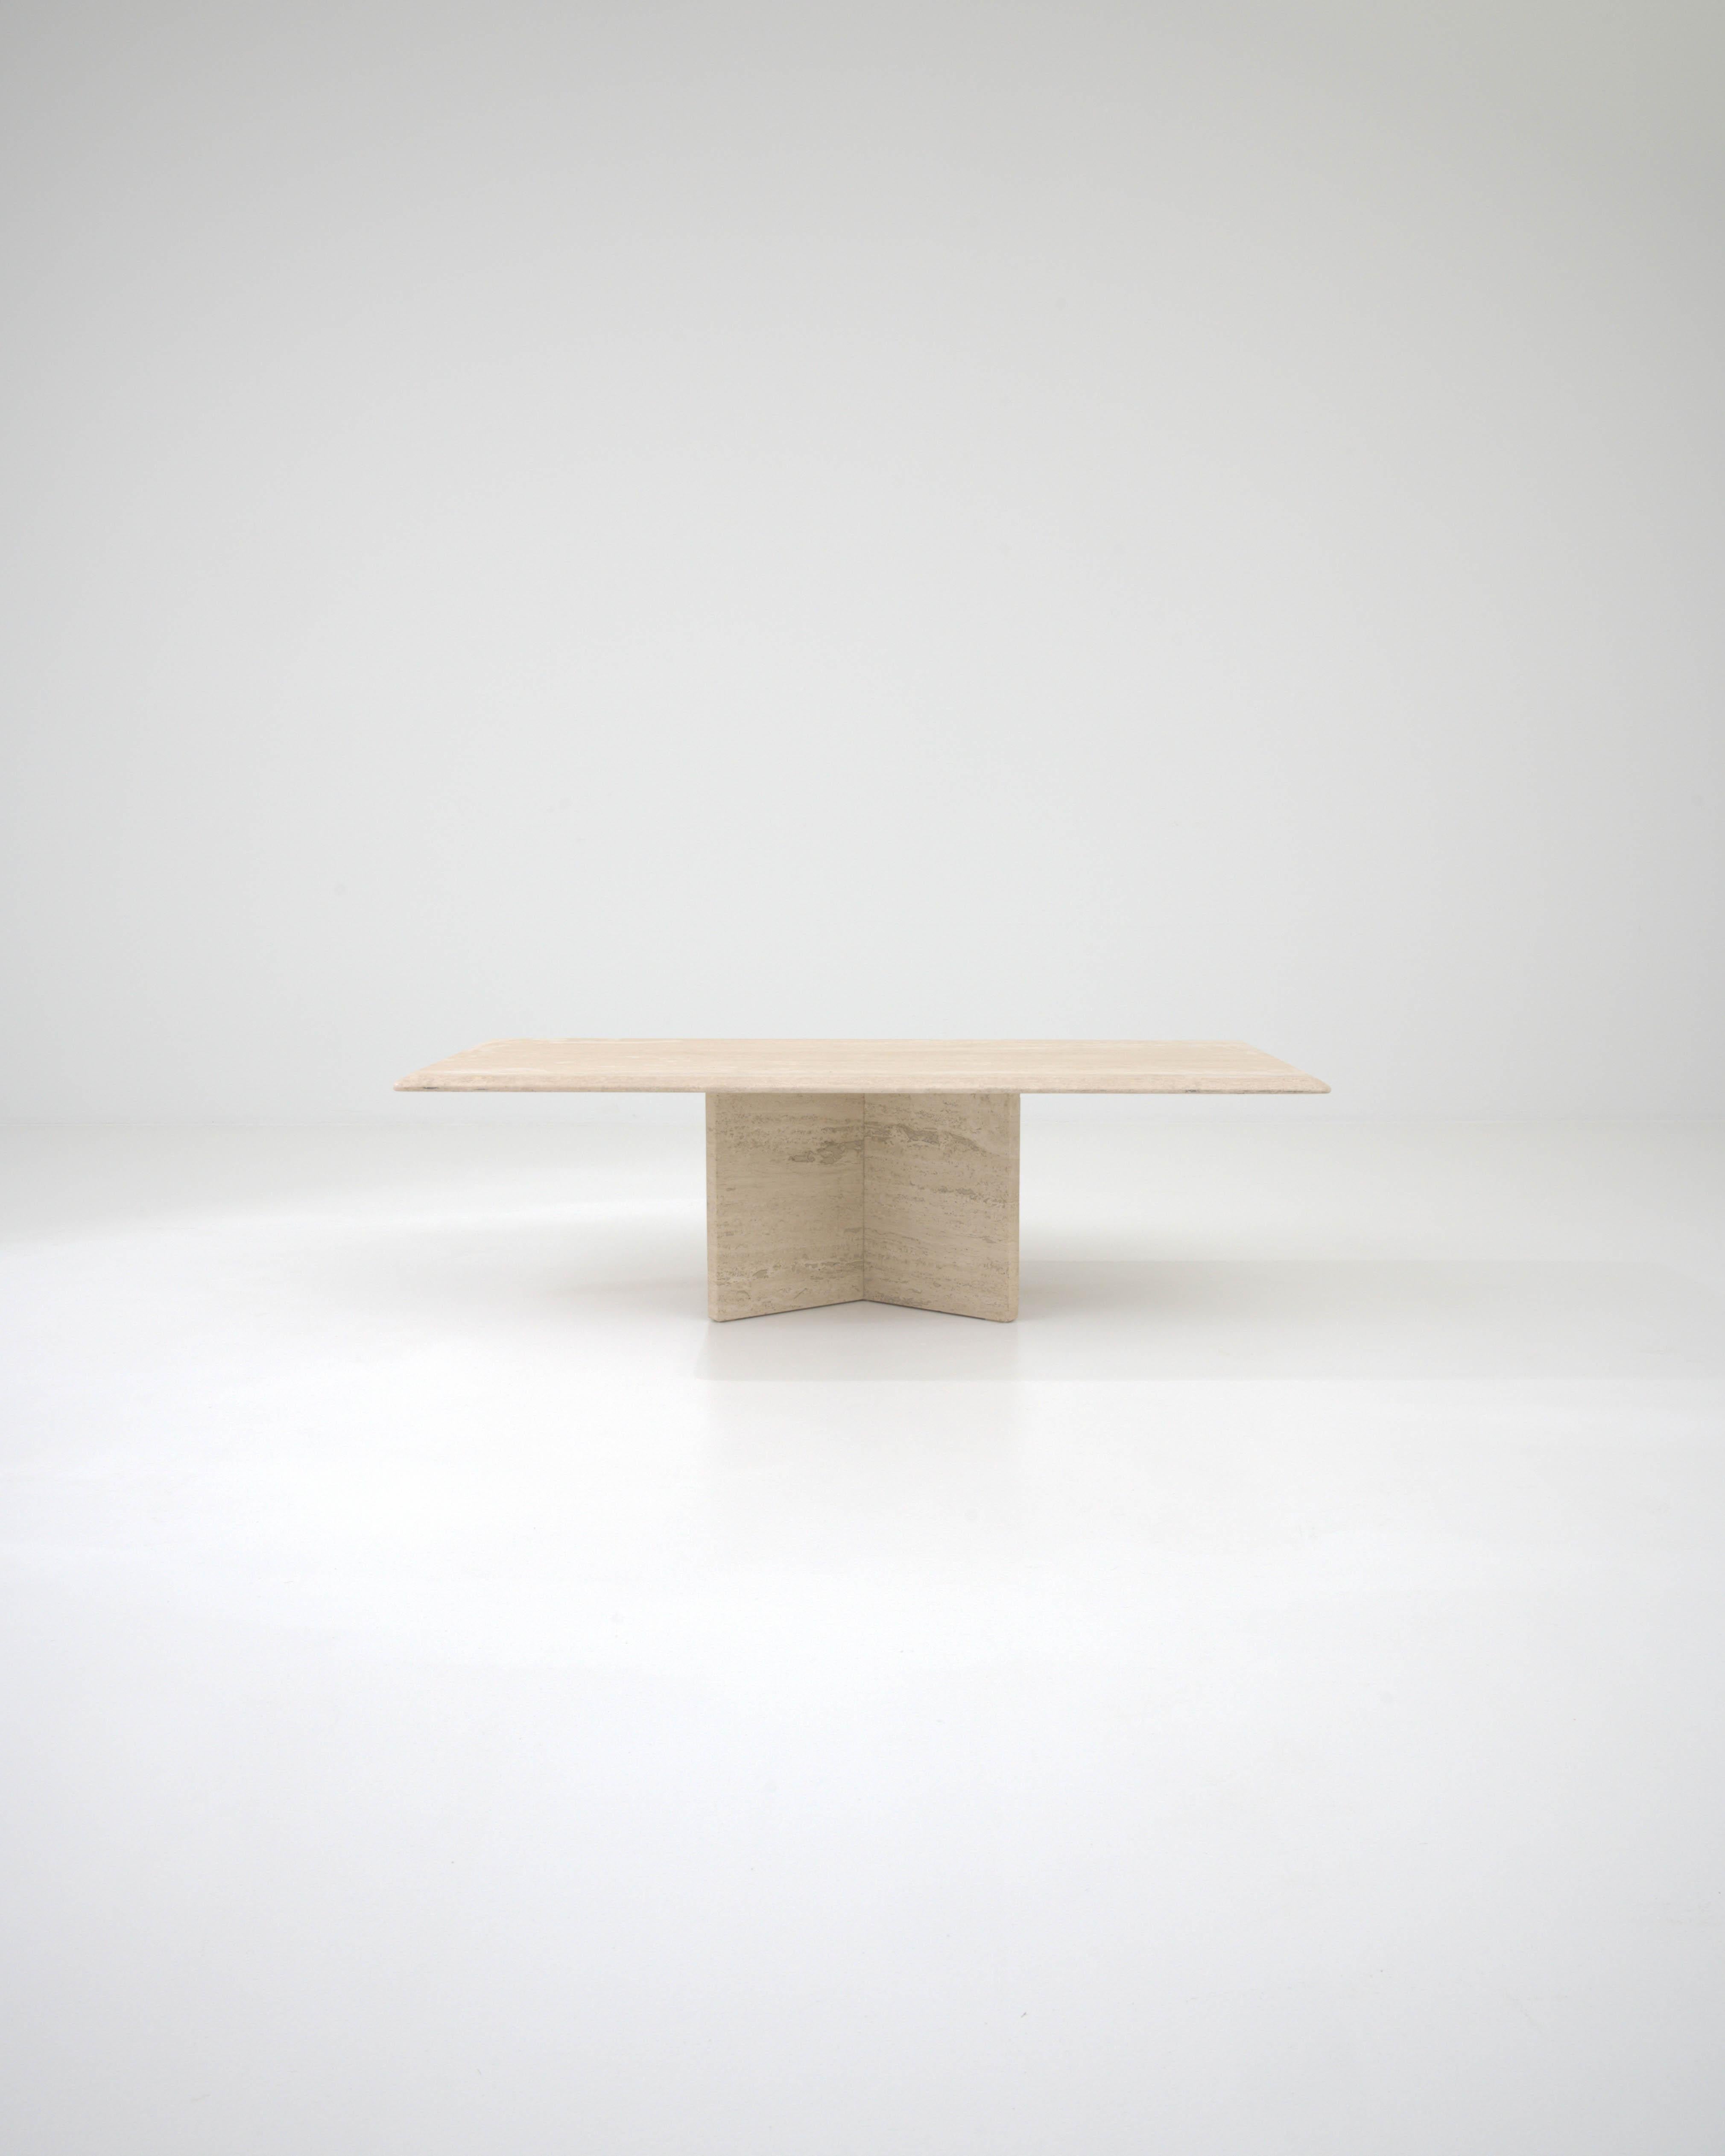 This sculptural table, crafted from cream colored marble in 20th century Italy, features a square slab as its tabletop, elegantly elevated on stone blocks. These blocks are artfully assembled like an open book and secured with metal rings, resulting